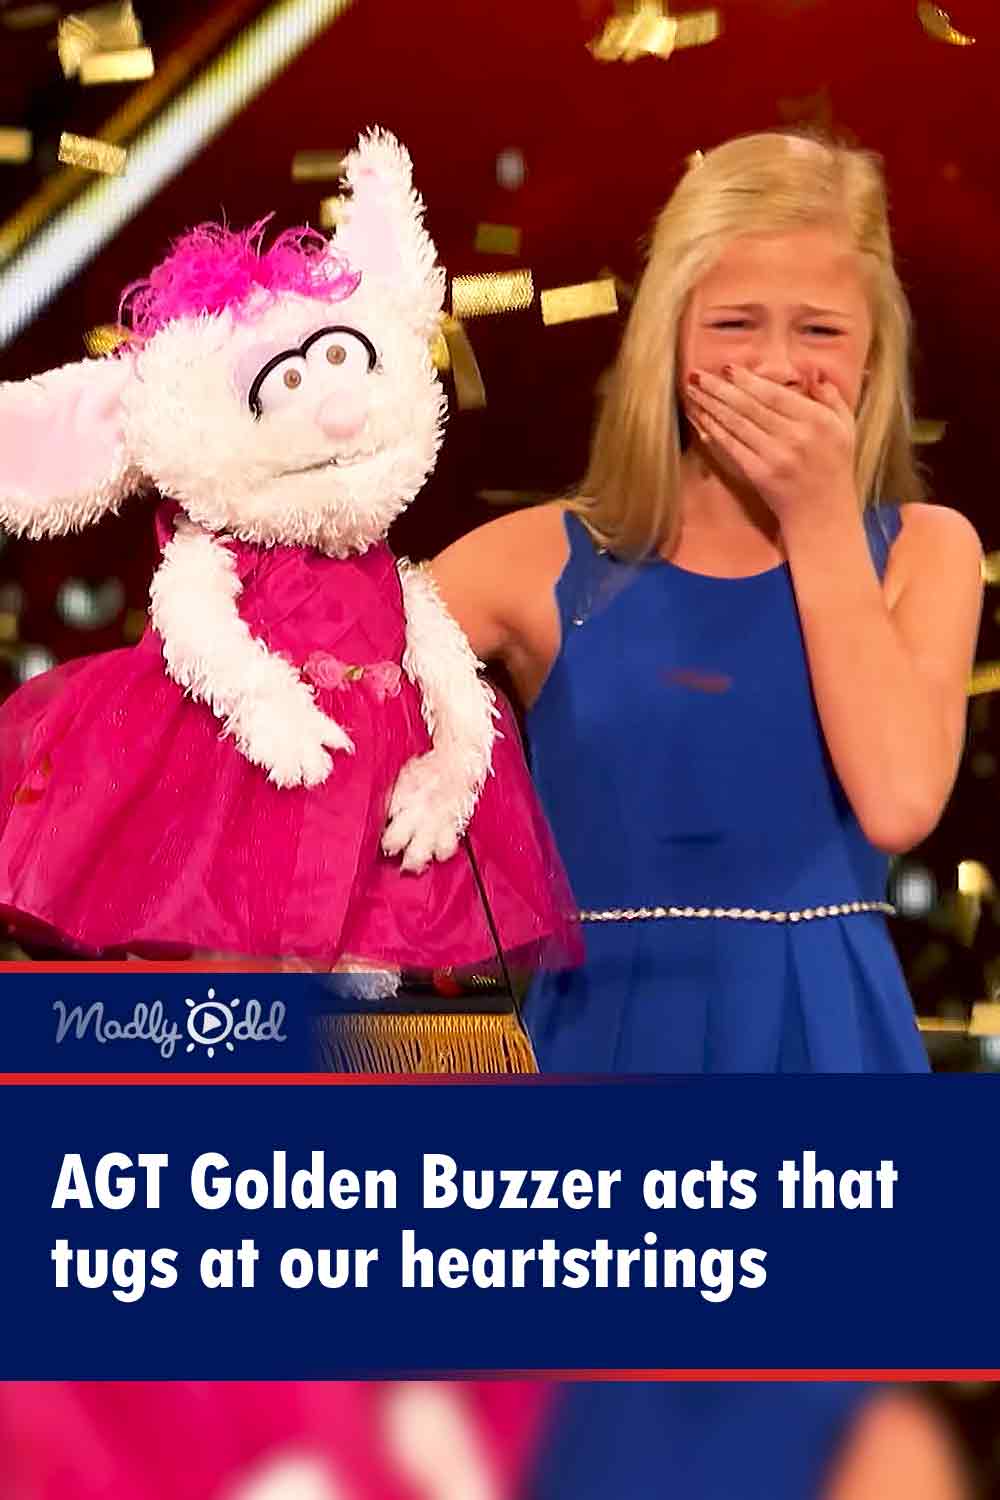 AGT Golden Buzzer acts that tugs at our heartstrings